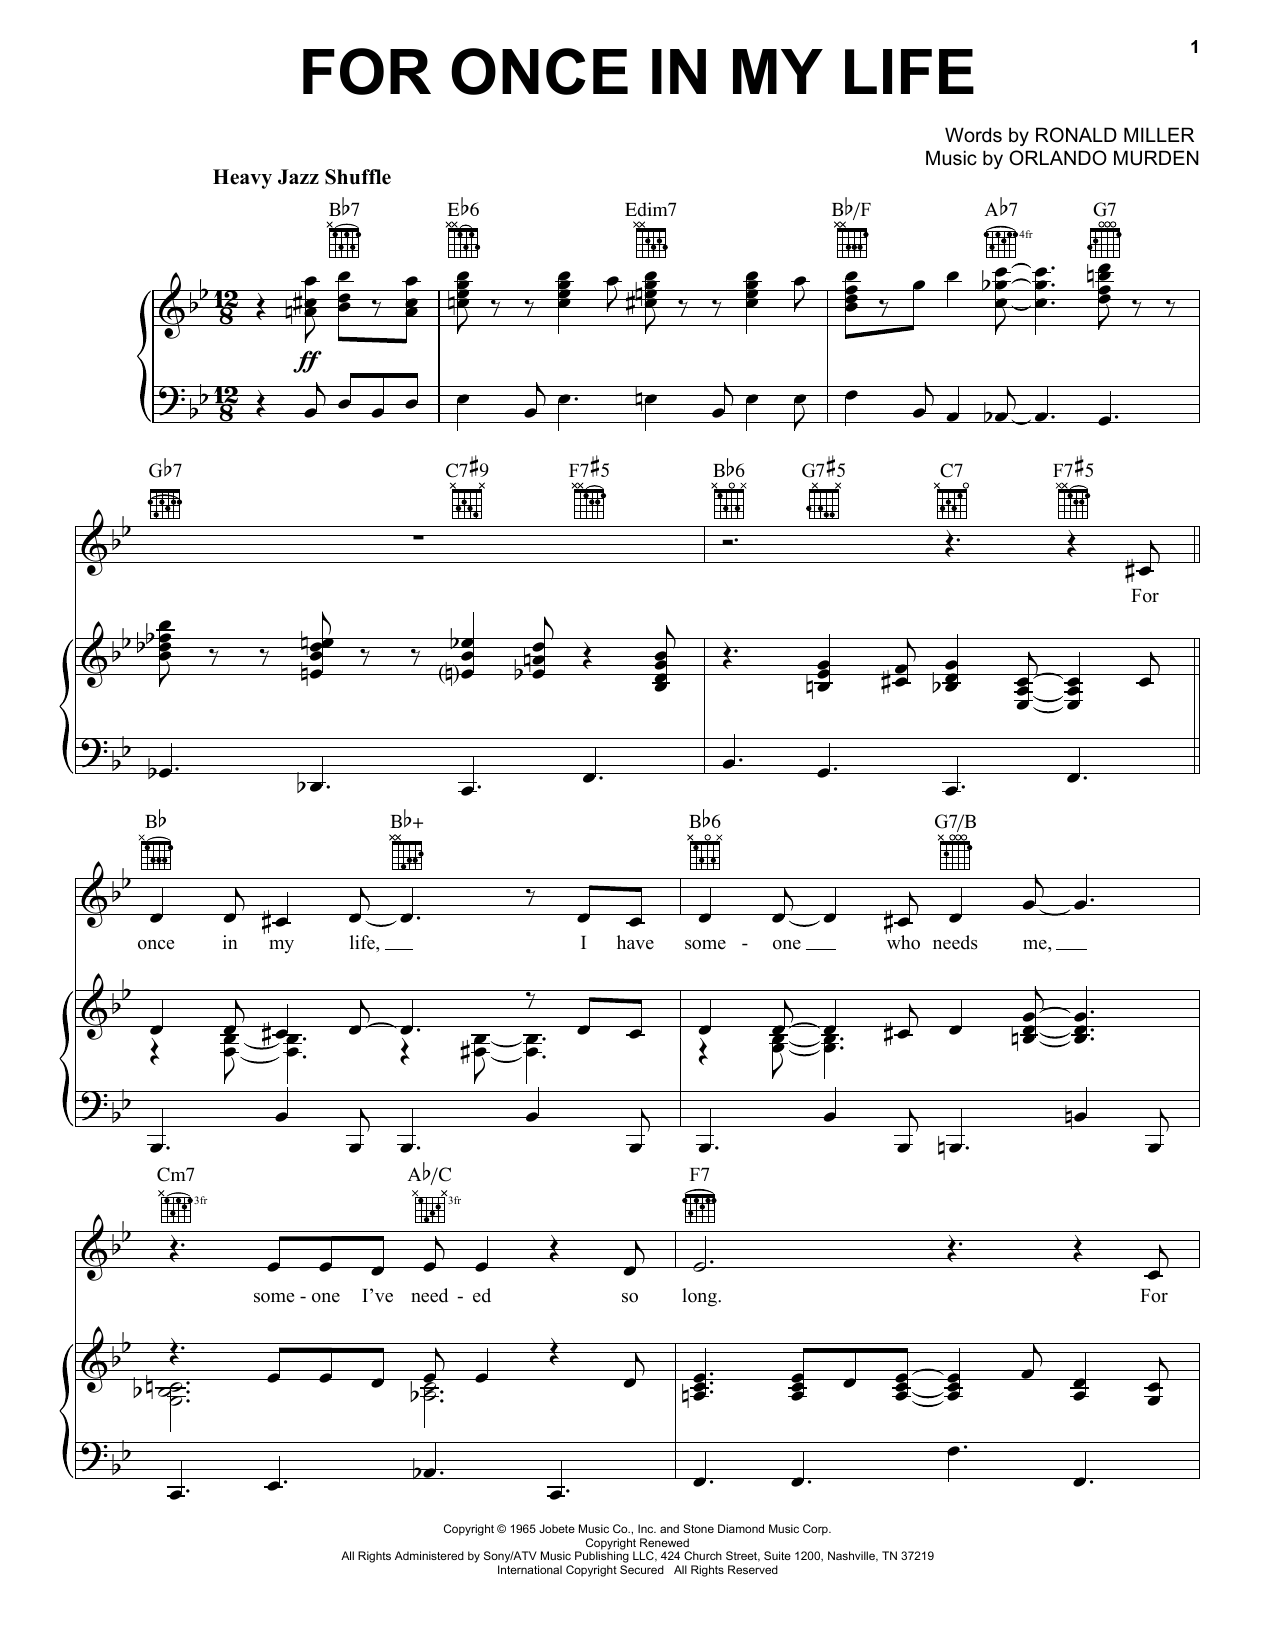 Download Frank Sinatra For Once In My Life Sheet Music